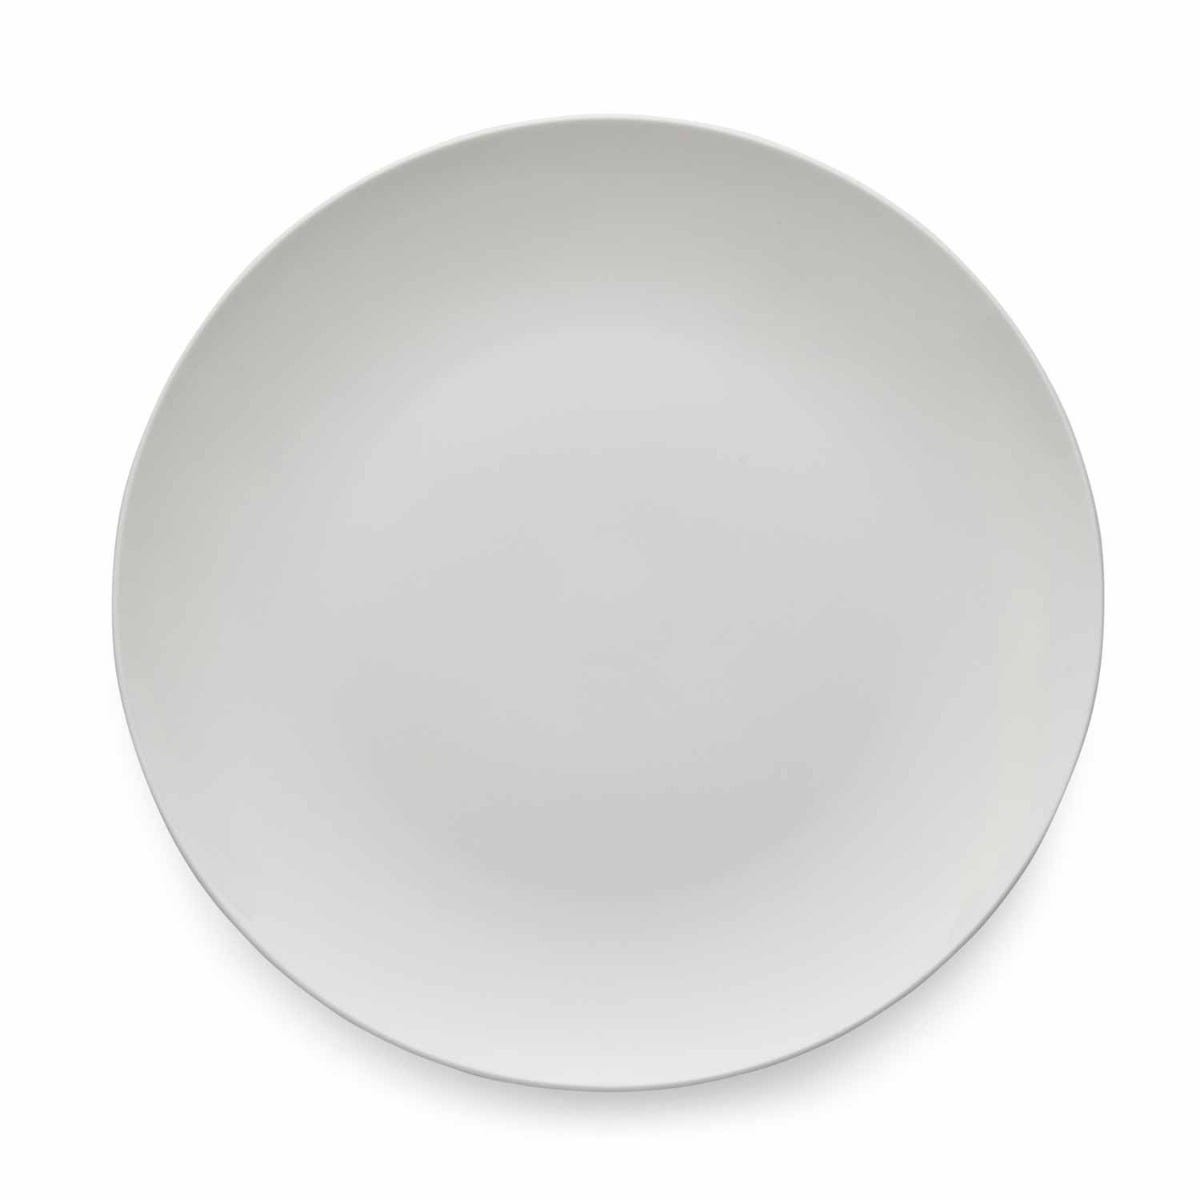 Serendipity Set of 4 Coupe Dinner Plates